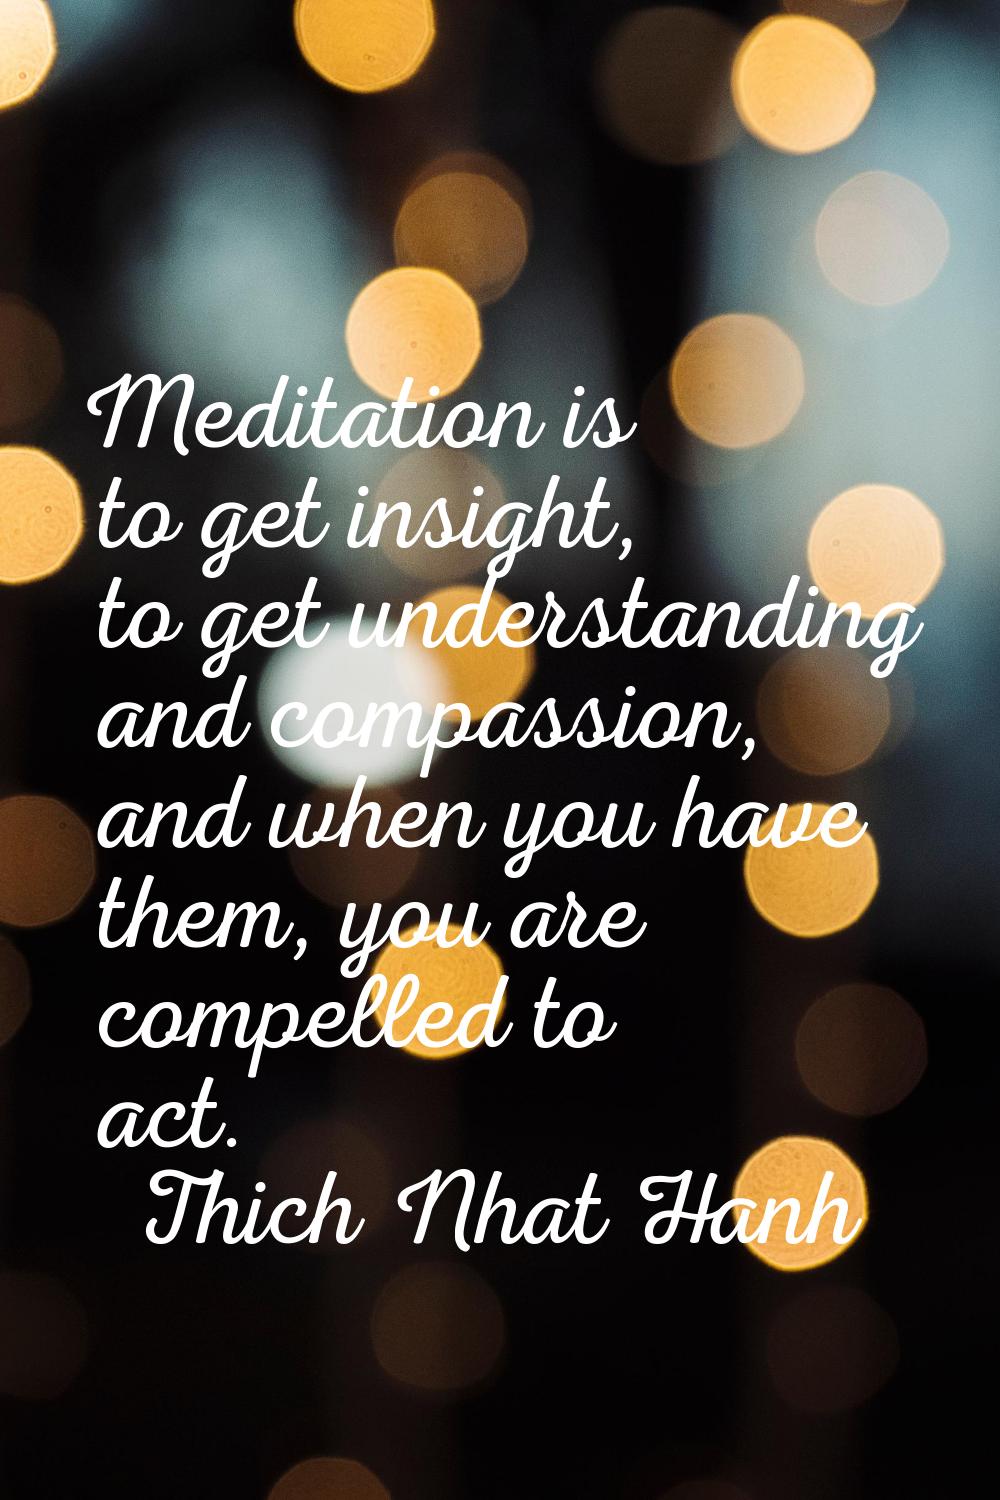 Meditation is to get insight, to get understanding and compassion, and when you have them, you are 